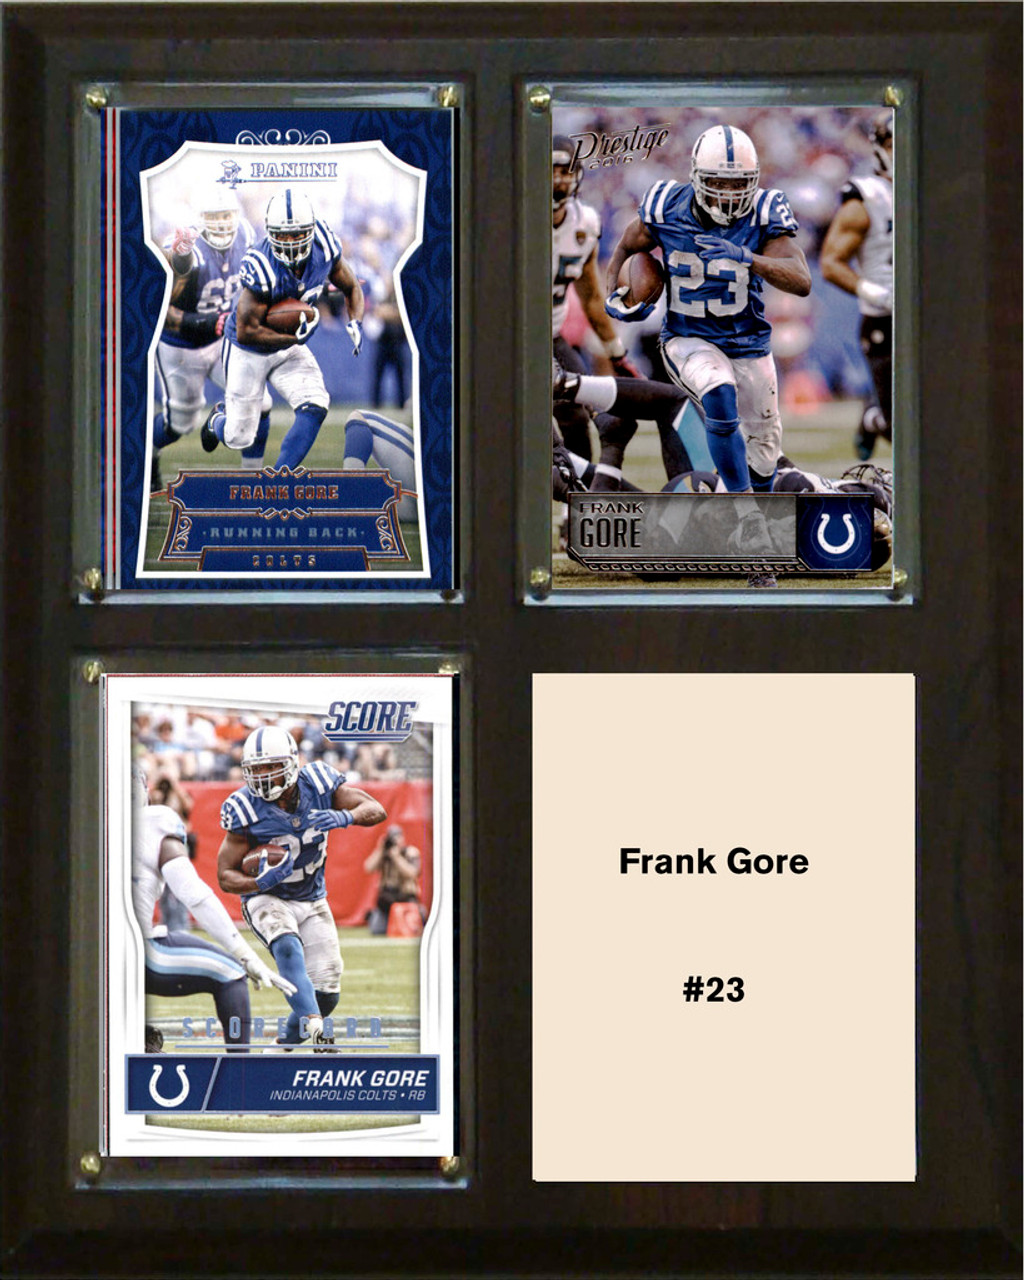 NFL 8"x10" Frank Gore Indianapolis Colts Three Card Plaque